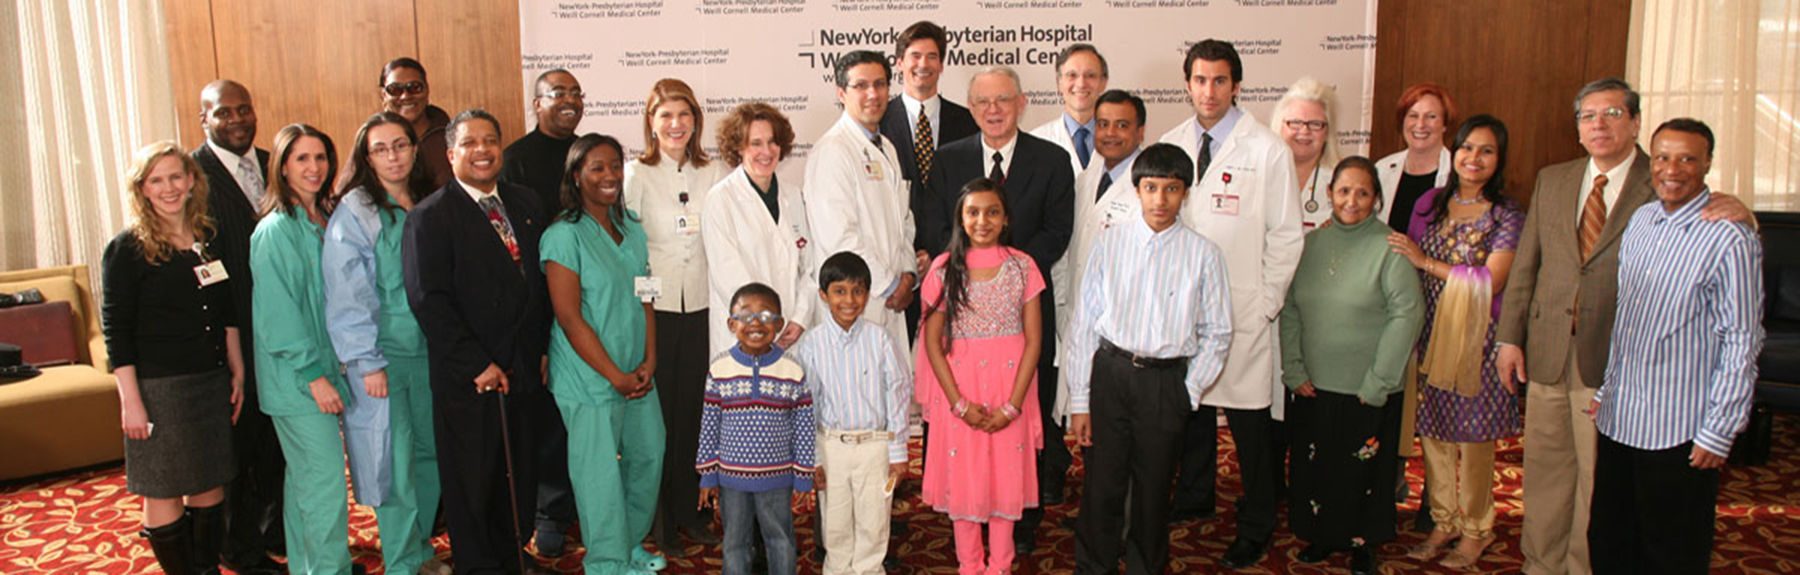 Group photo of the patients involved in an early donor exchange